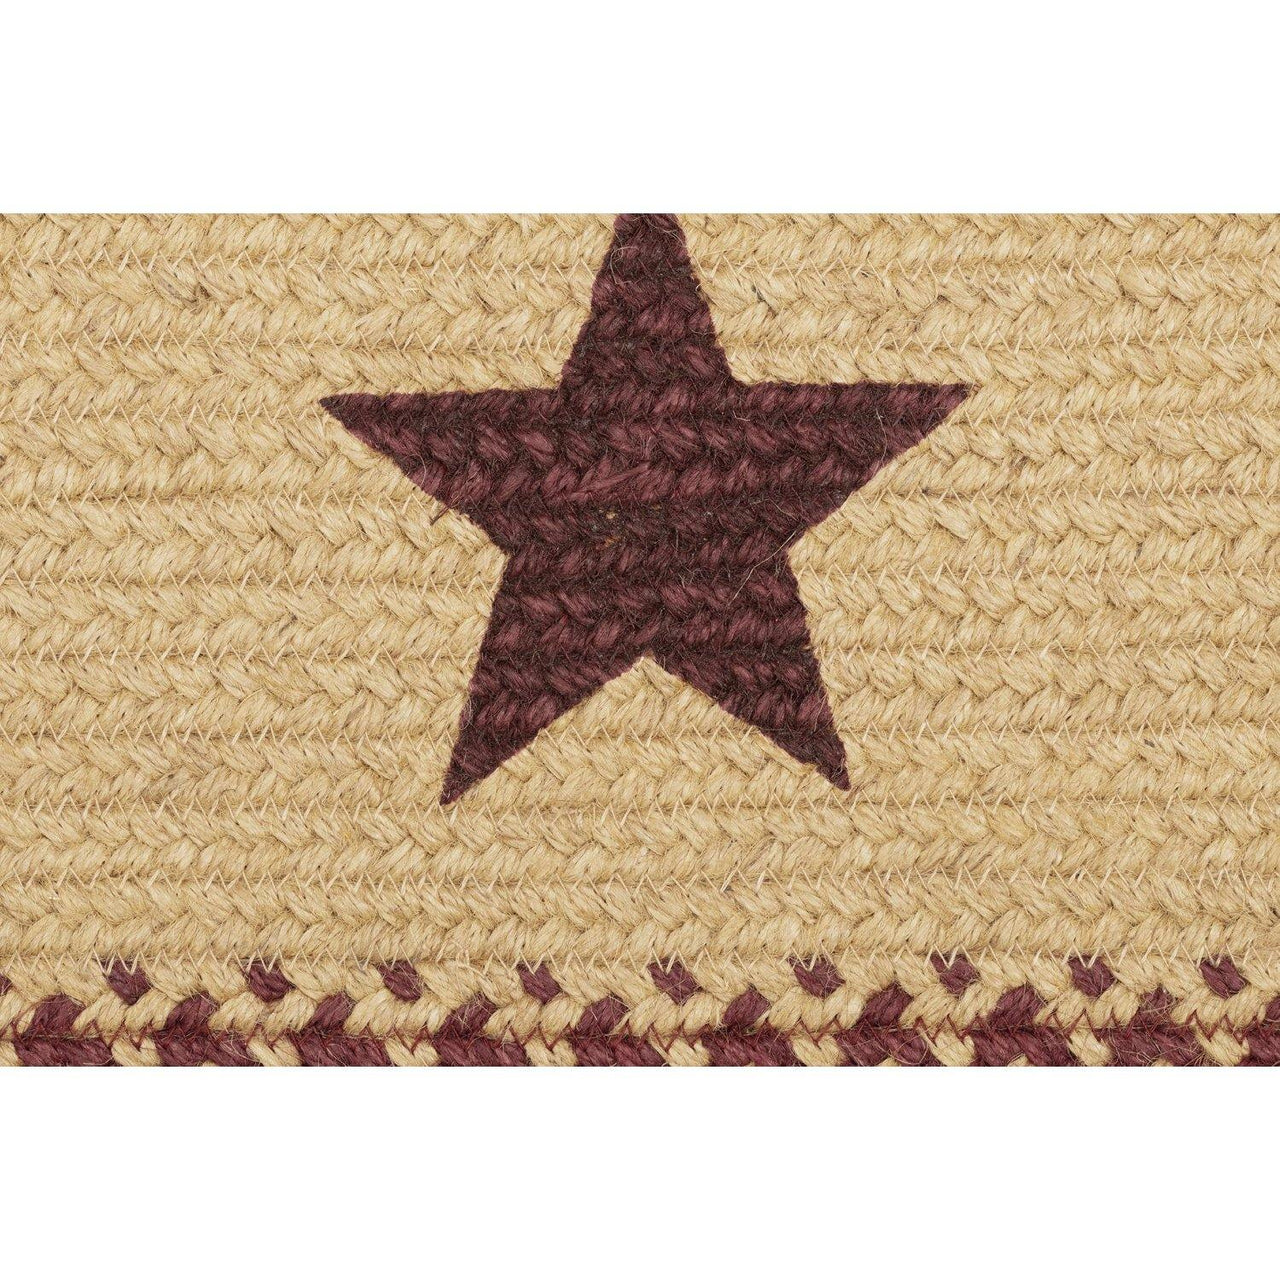 Burgundy Red Primitive Jute Braided Rug Oval Stencil Stars 20"x30" with Rug Pad VHC Brands - The Fox Decor